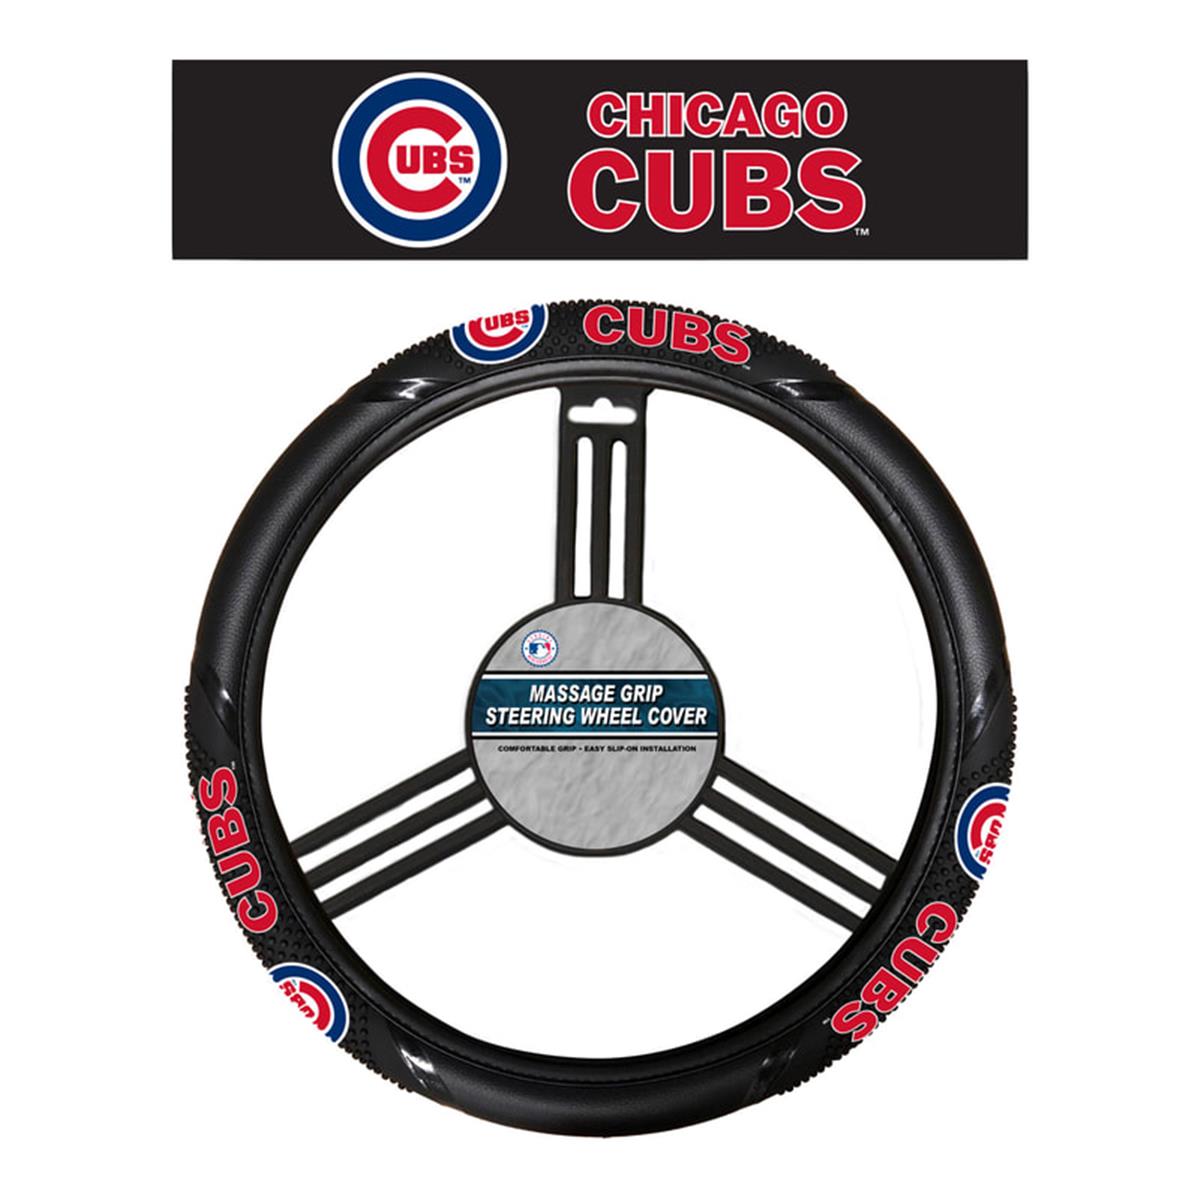 Picture of Fremont Die 2324566616 NCAA Chicago Cubs Steering Wheel Cover - Massage Grip Style